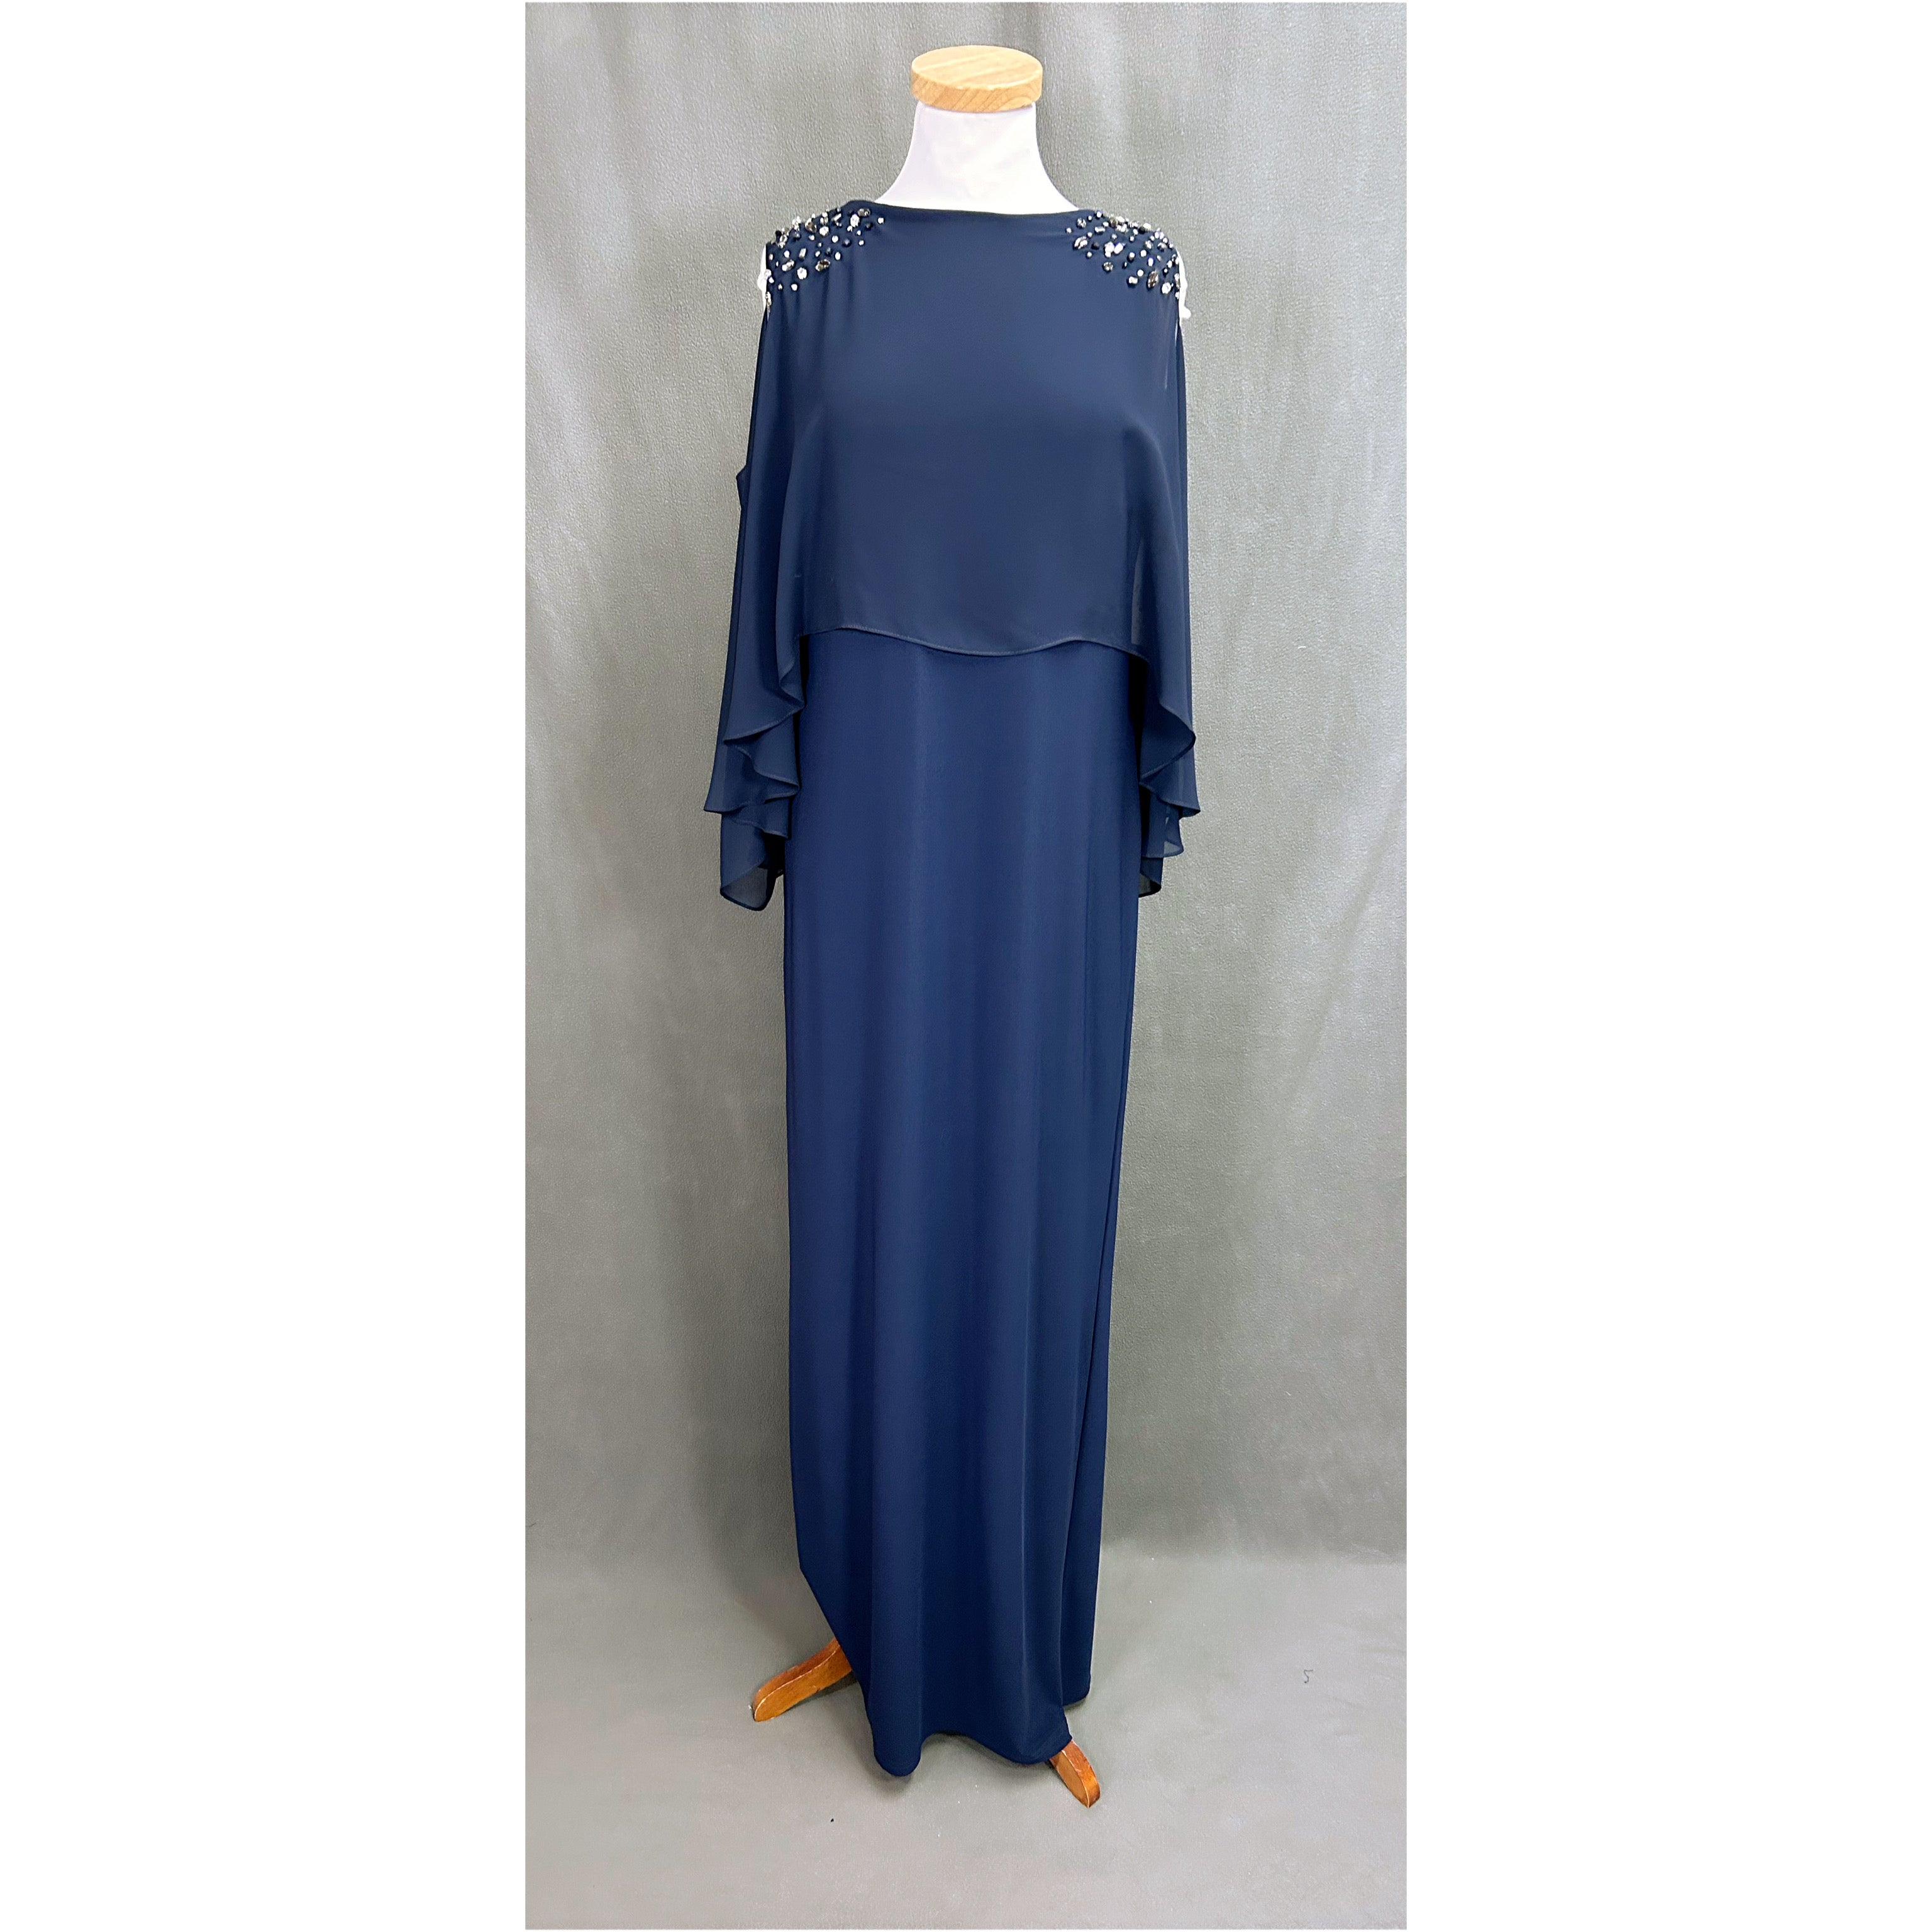 Cartise navy dress, size 10, NEW WITH TAGS!